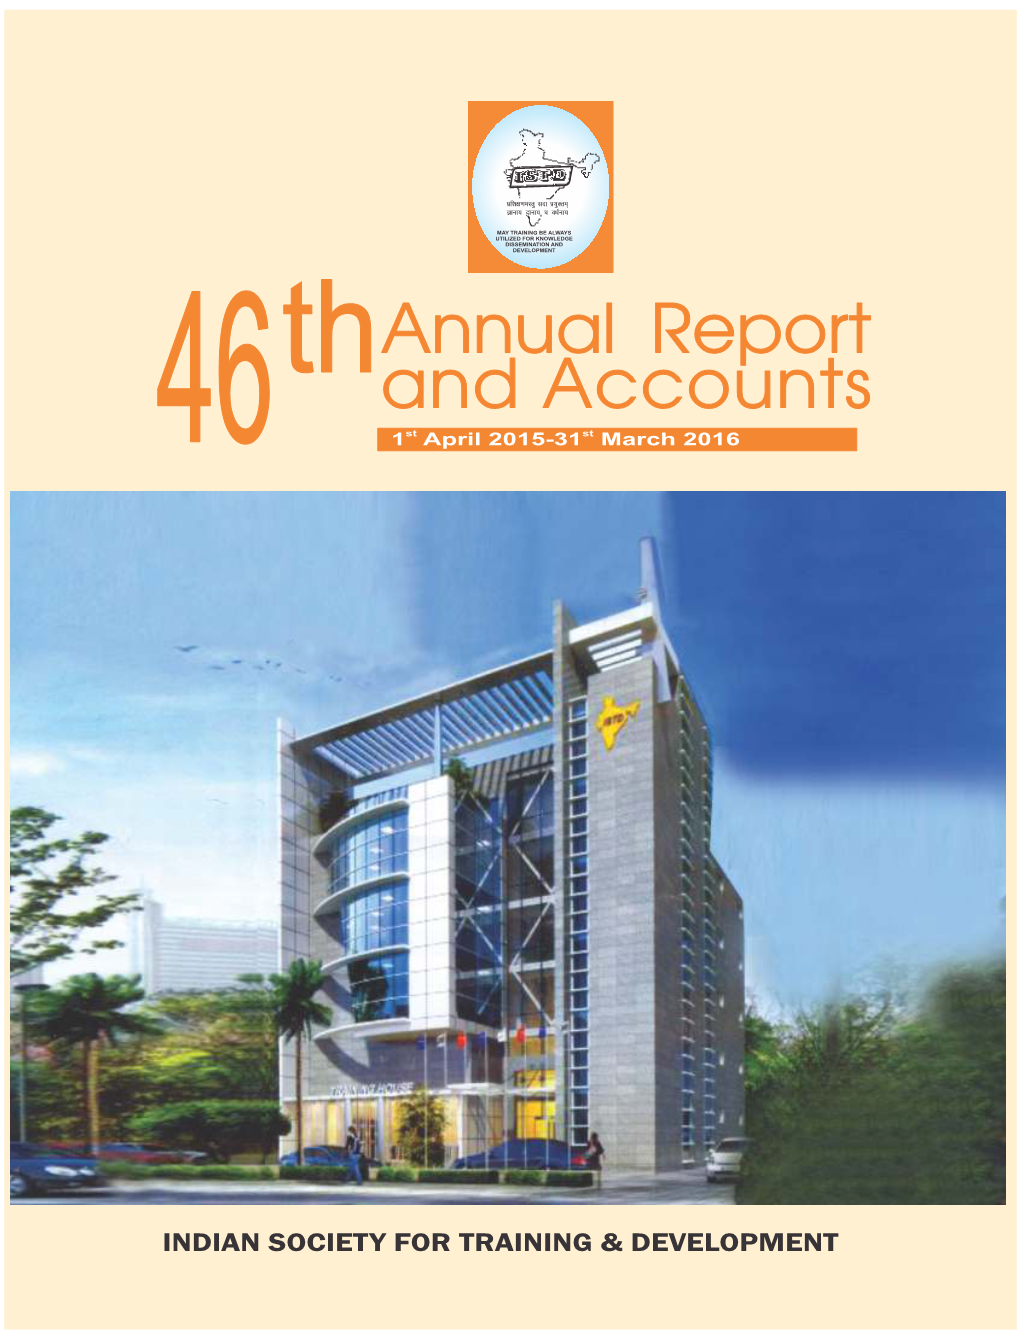 Annual Report Thand Accounts 46 1St April 2015-31St March 2016